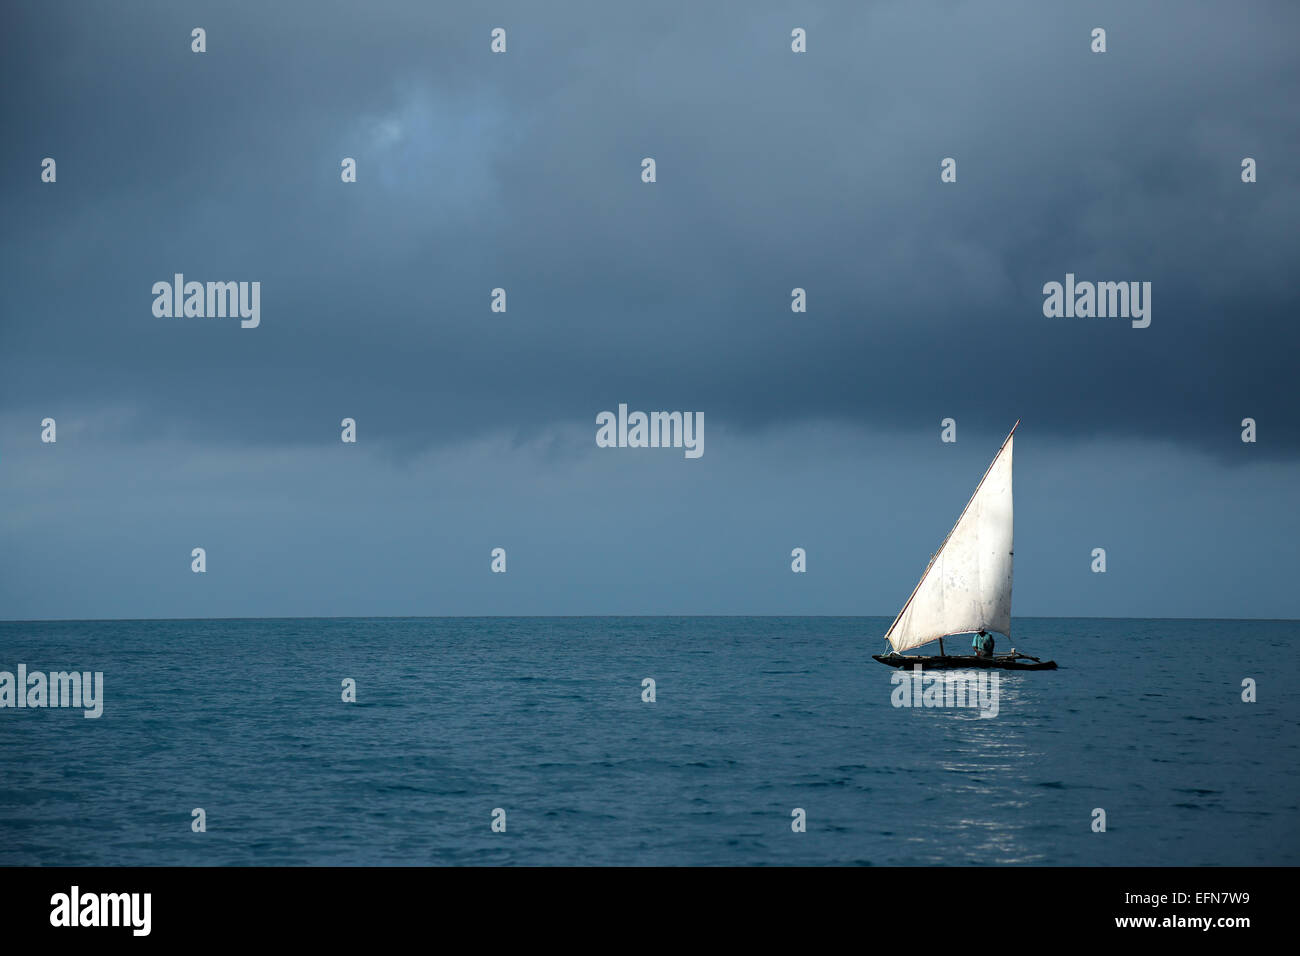 Wooden sailboat (dhow) on water with storm clouds, Zanzibar island Stock Photo